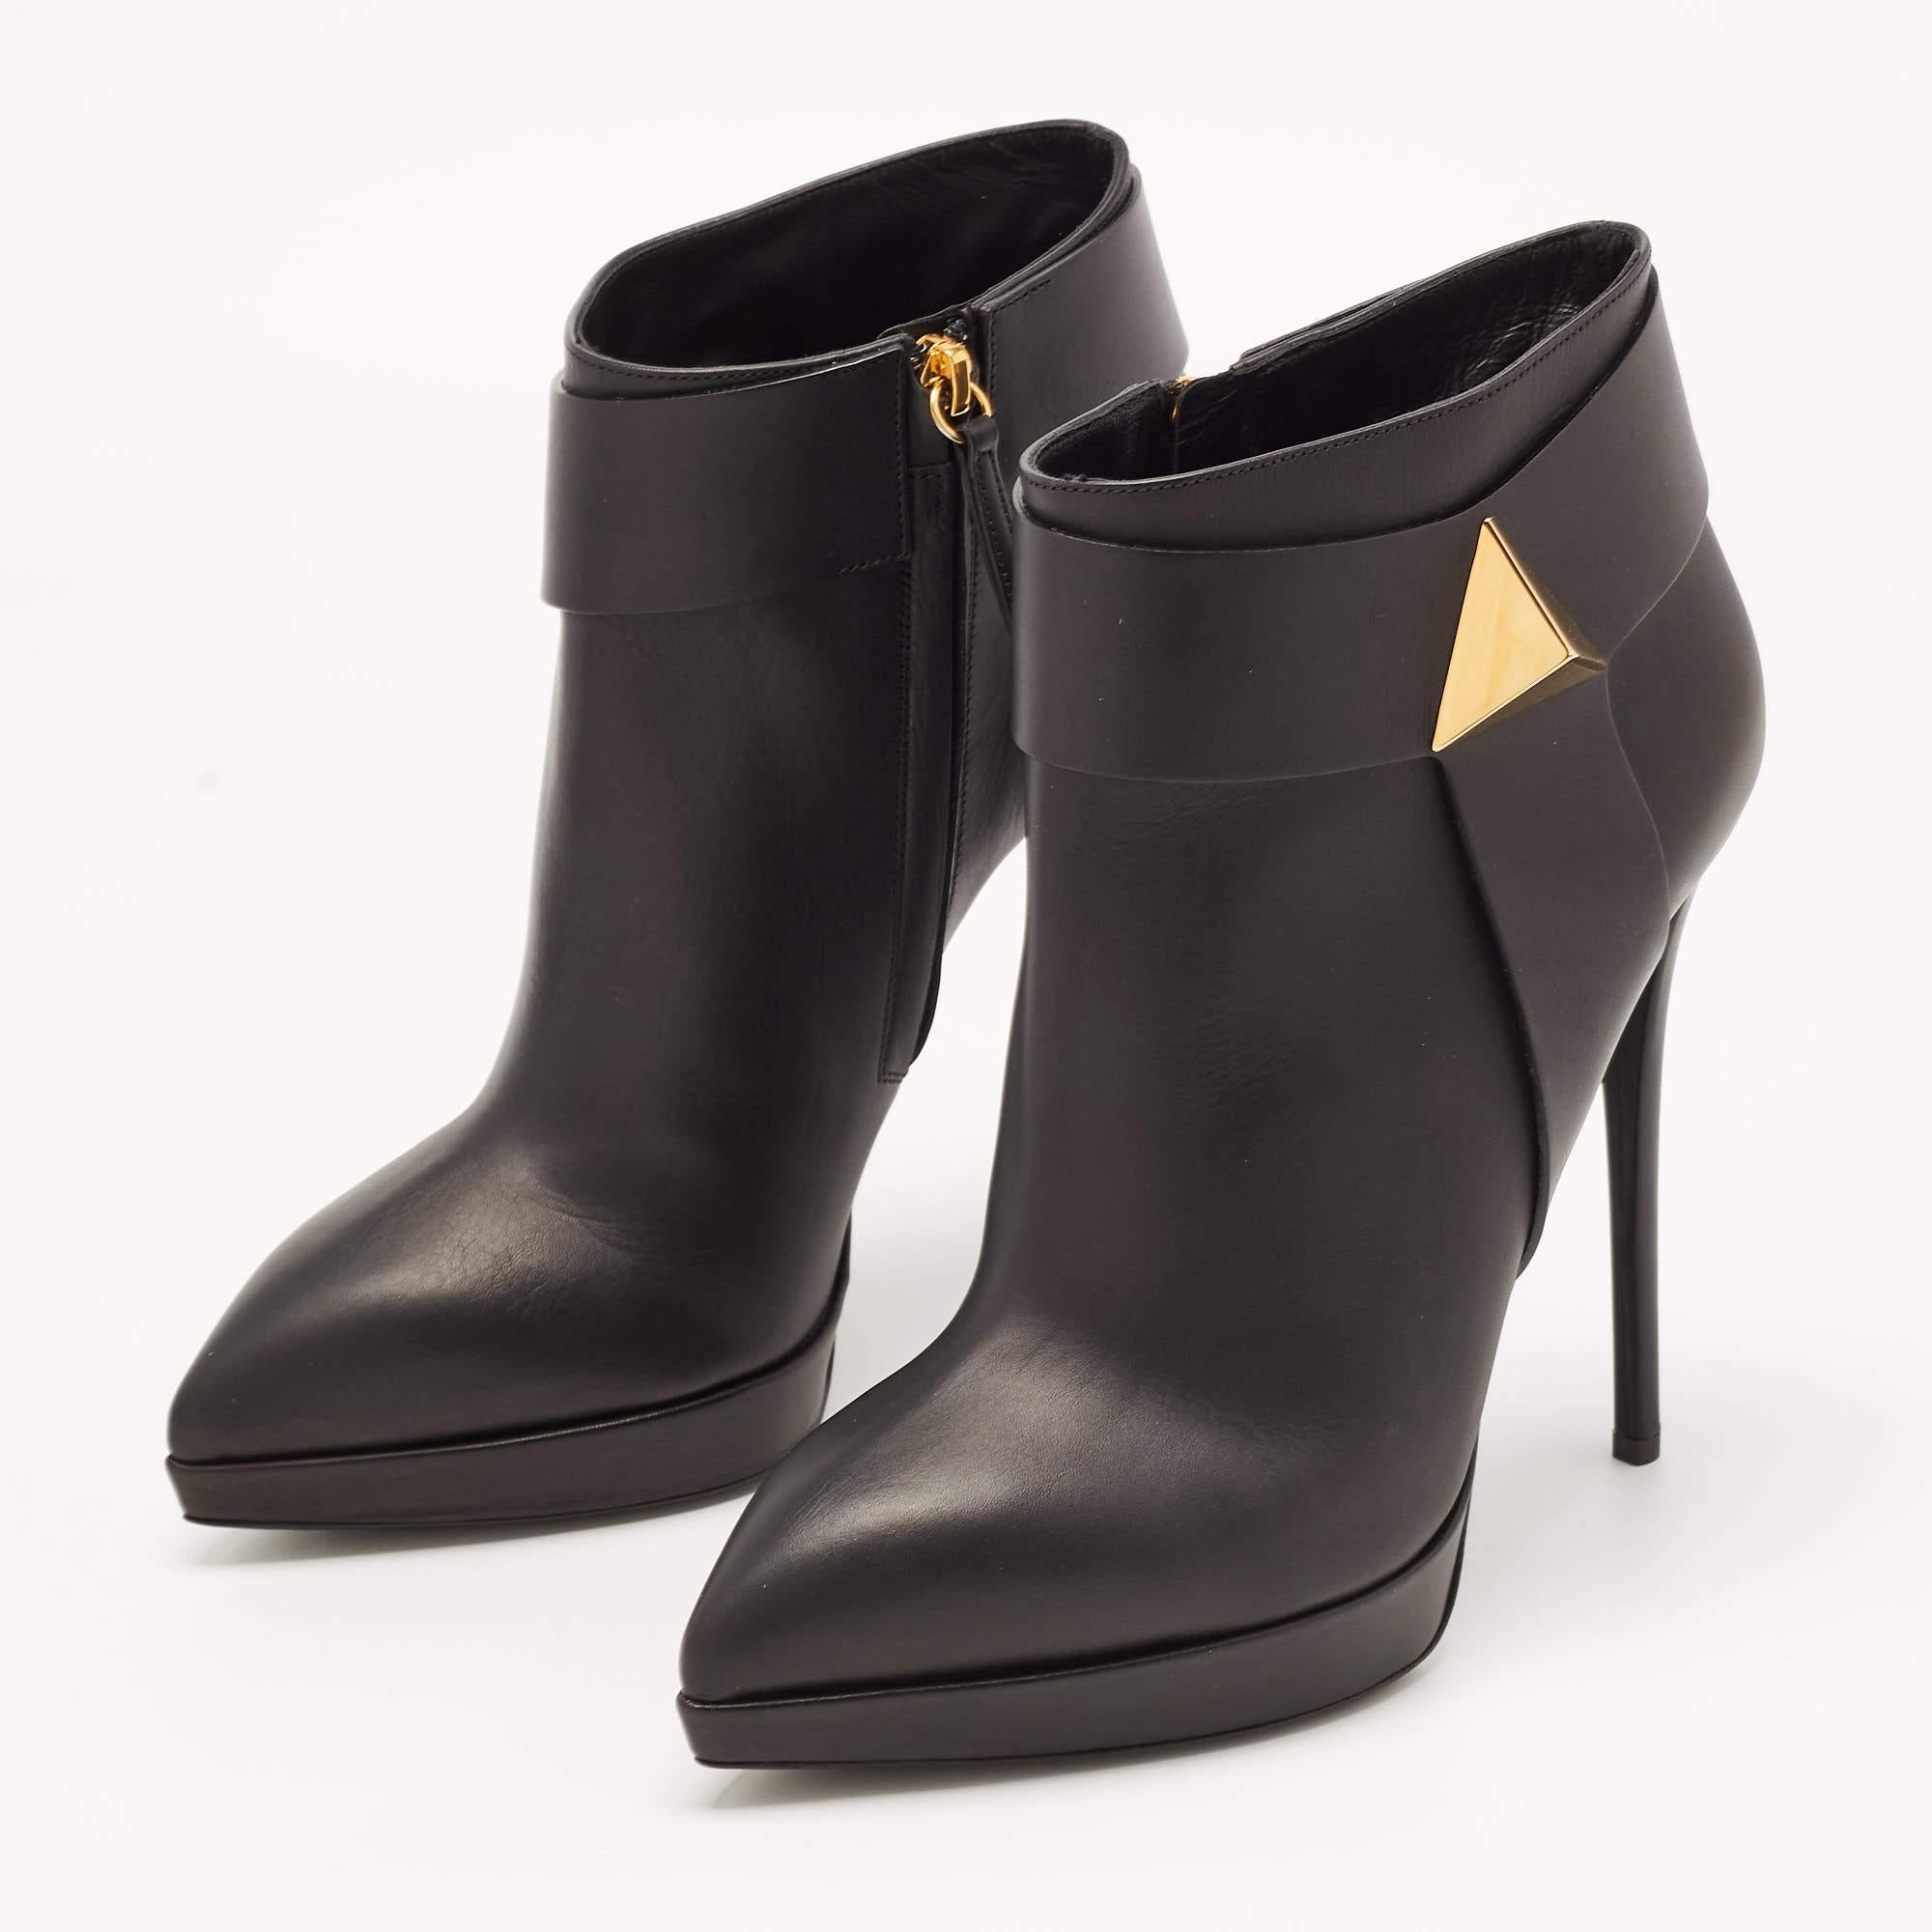 Enjoy the most fashionable days with these stylish boots. Modern in design and craftsmanship, they are fashioned to keep you comfortable and chic!

